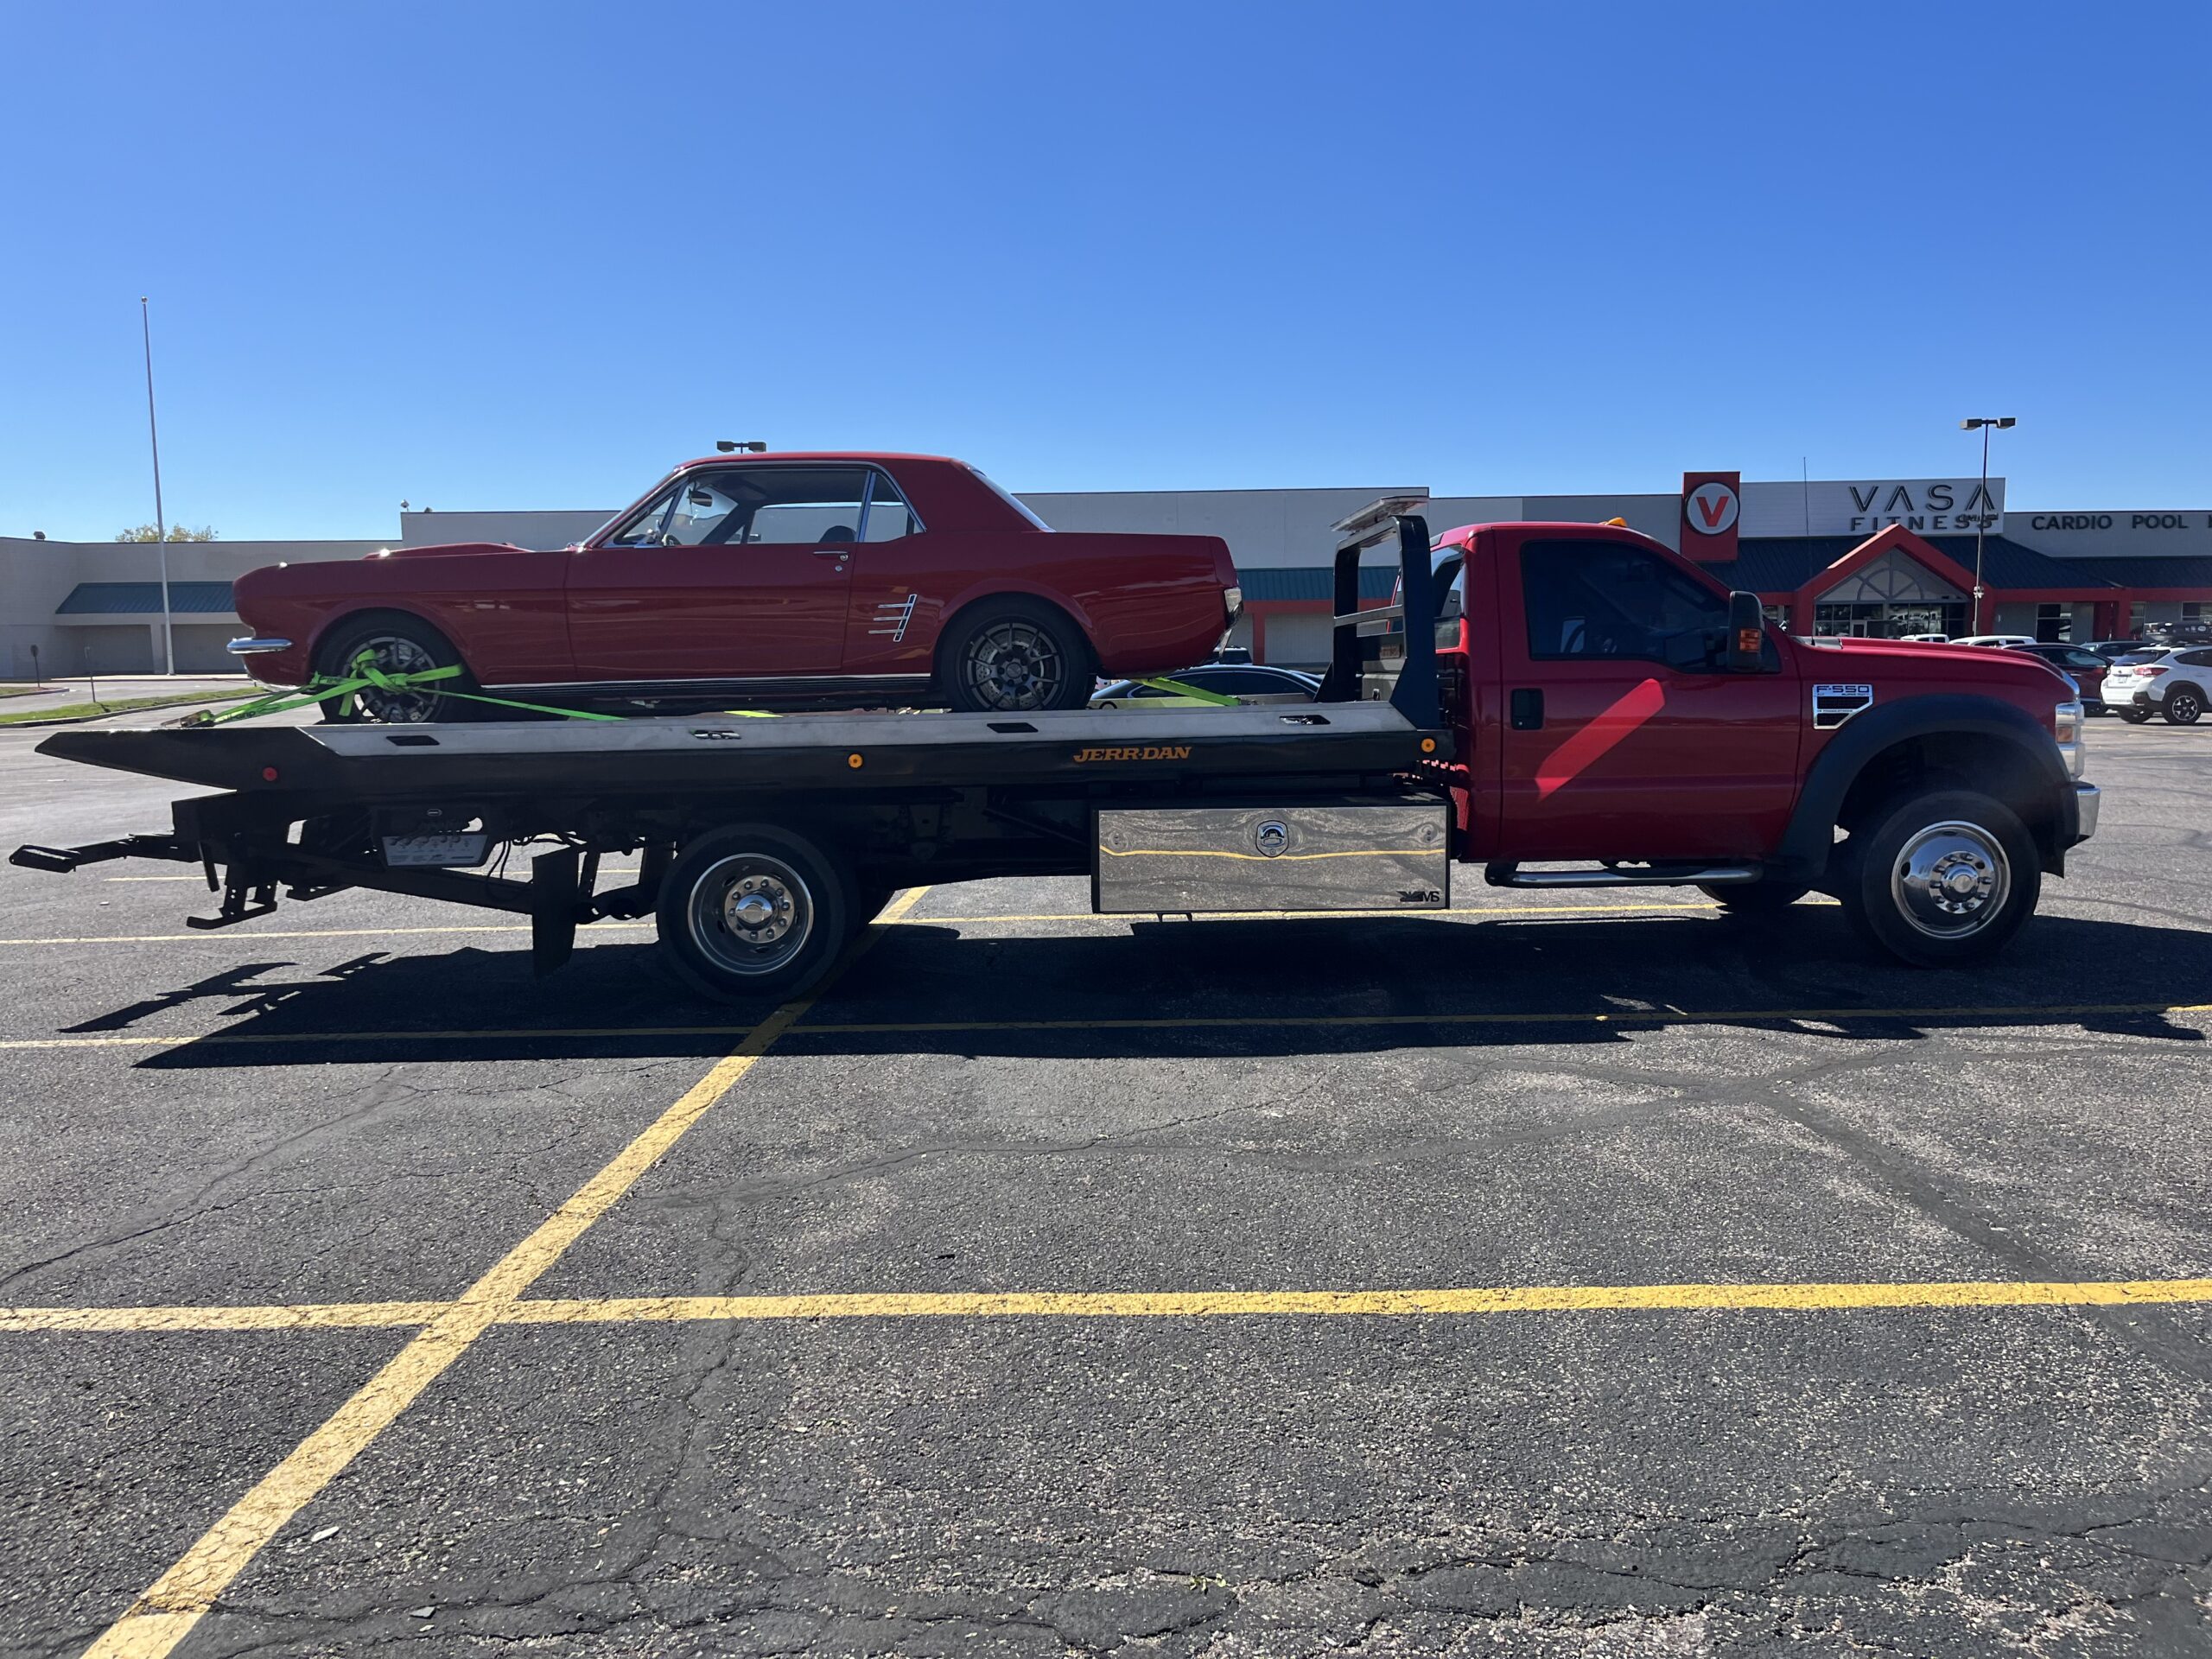 a red car being towed